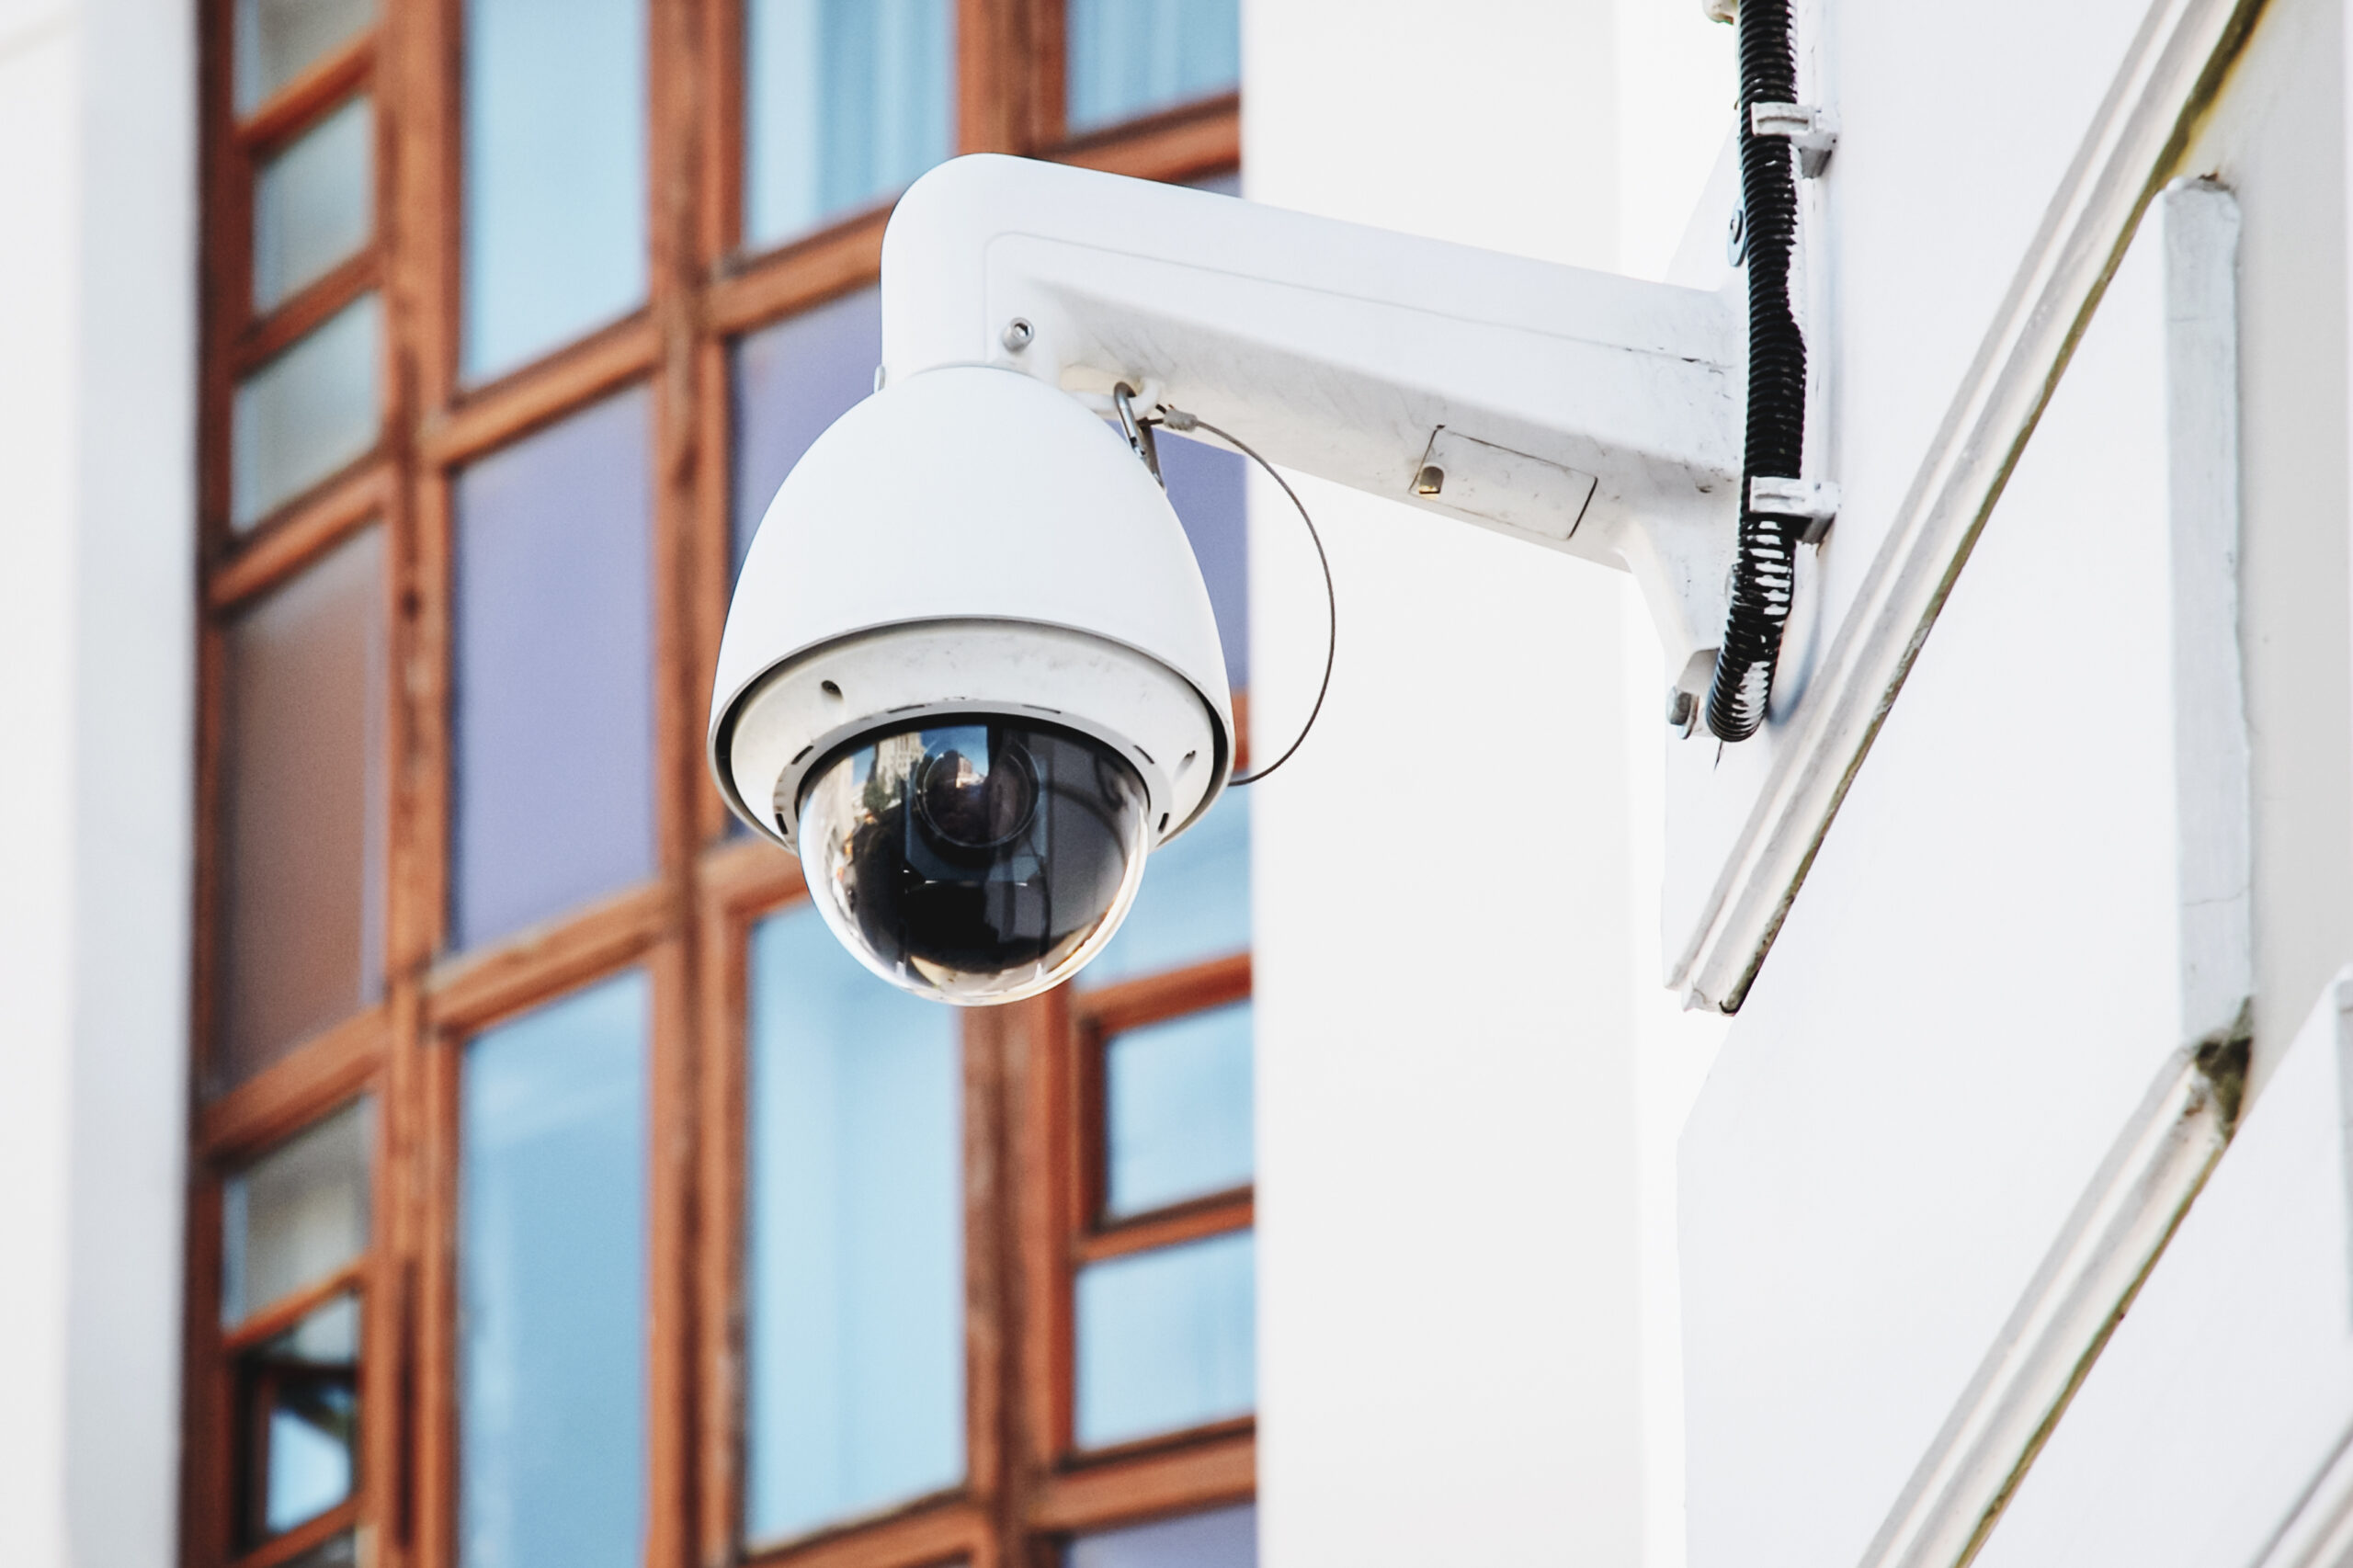 White and black spherical external surveillance camera on building facade